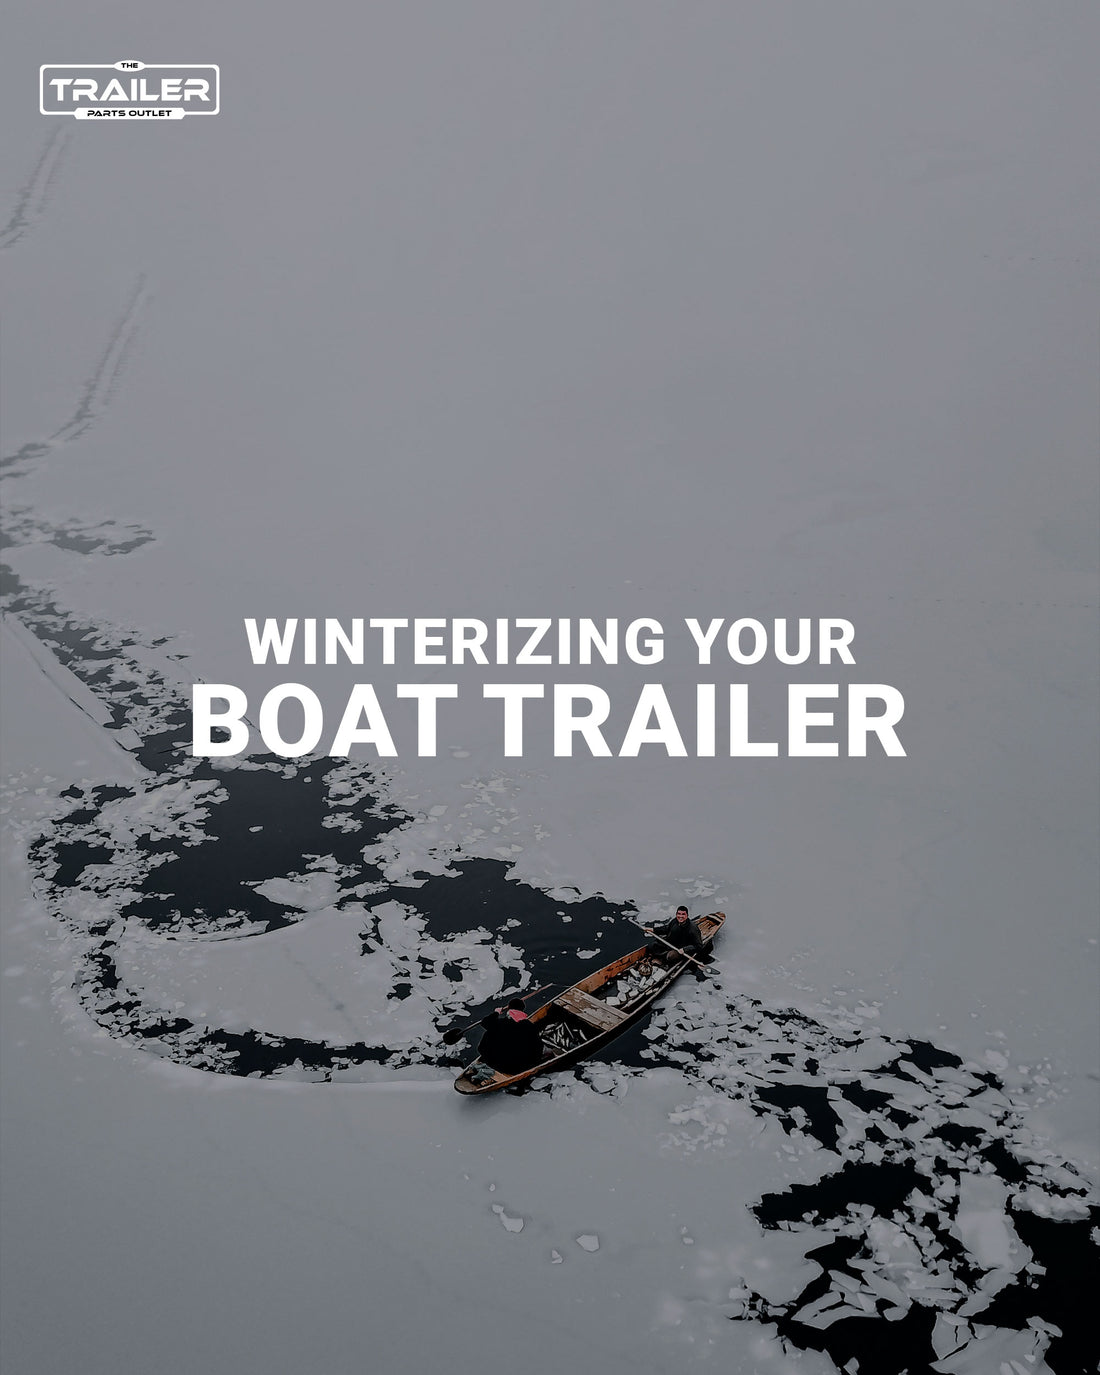 Winterizing Your Boat Trailer with The Trailer Parts Outlet